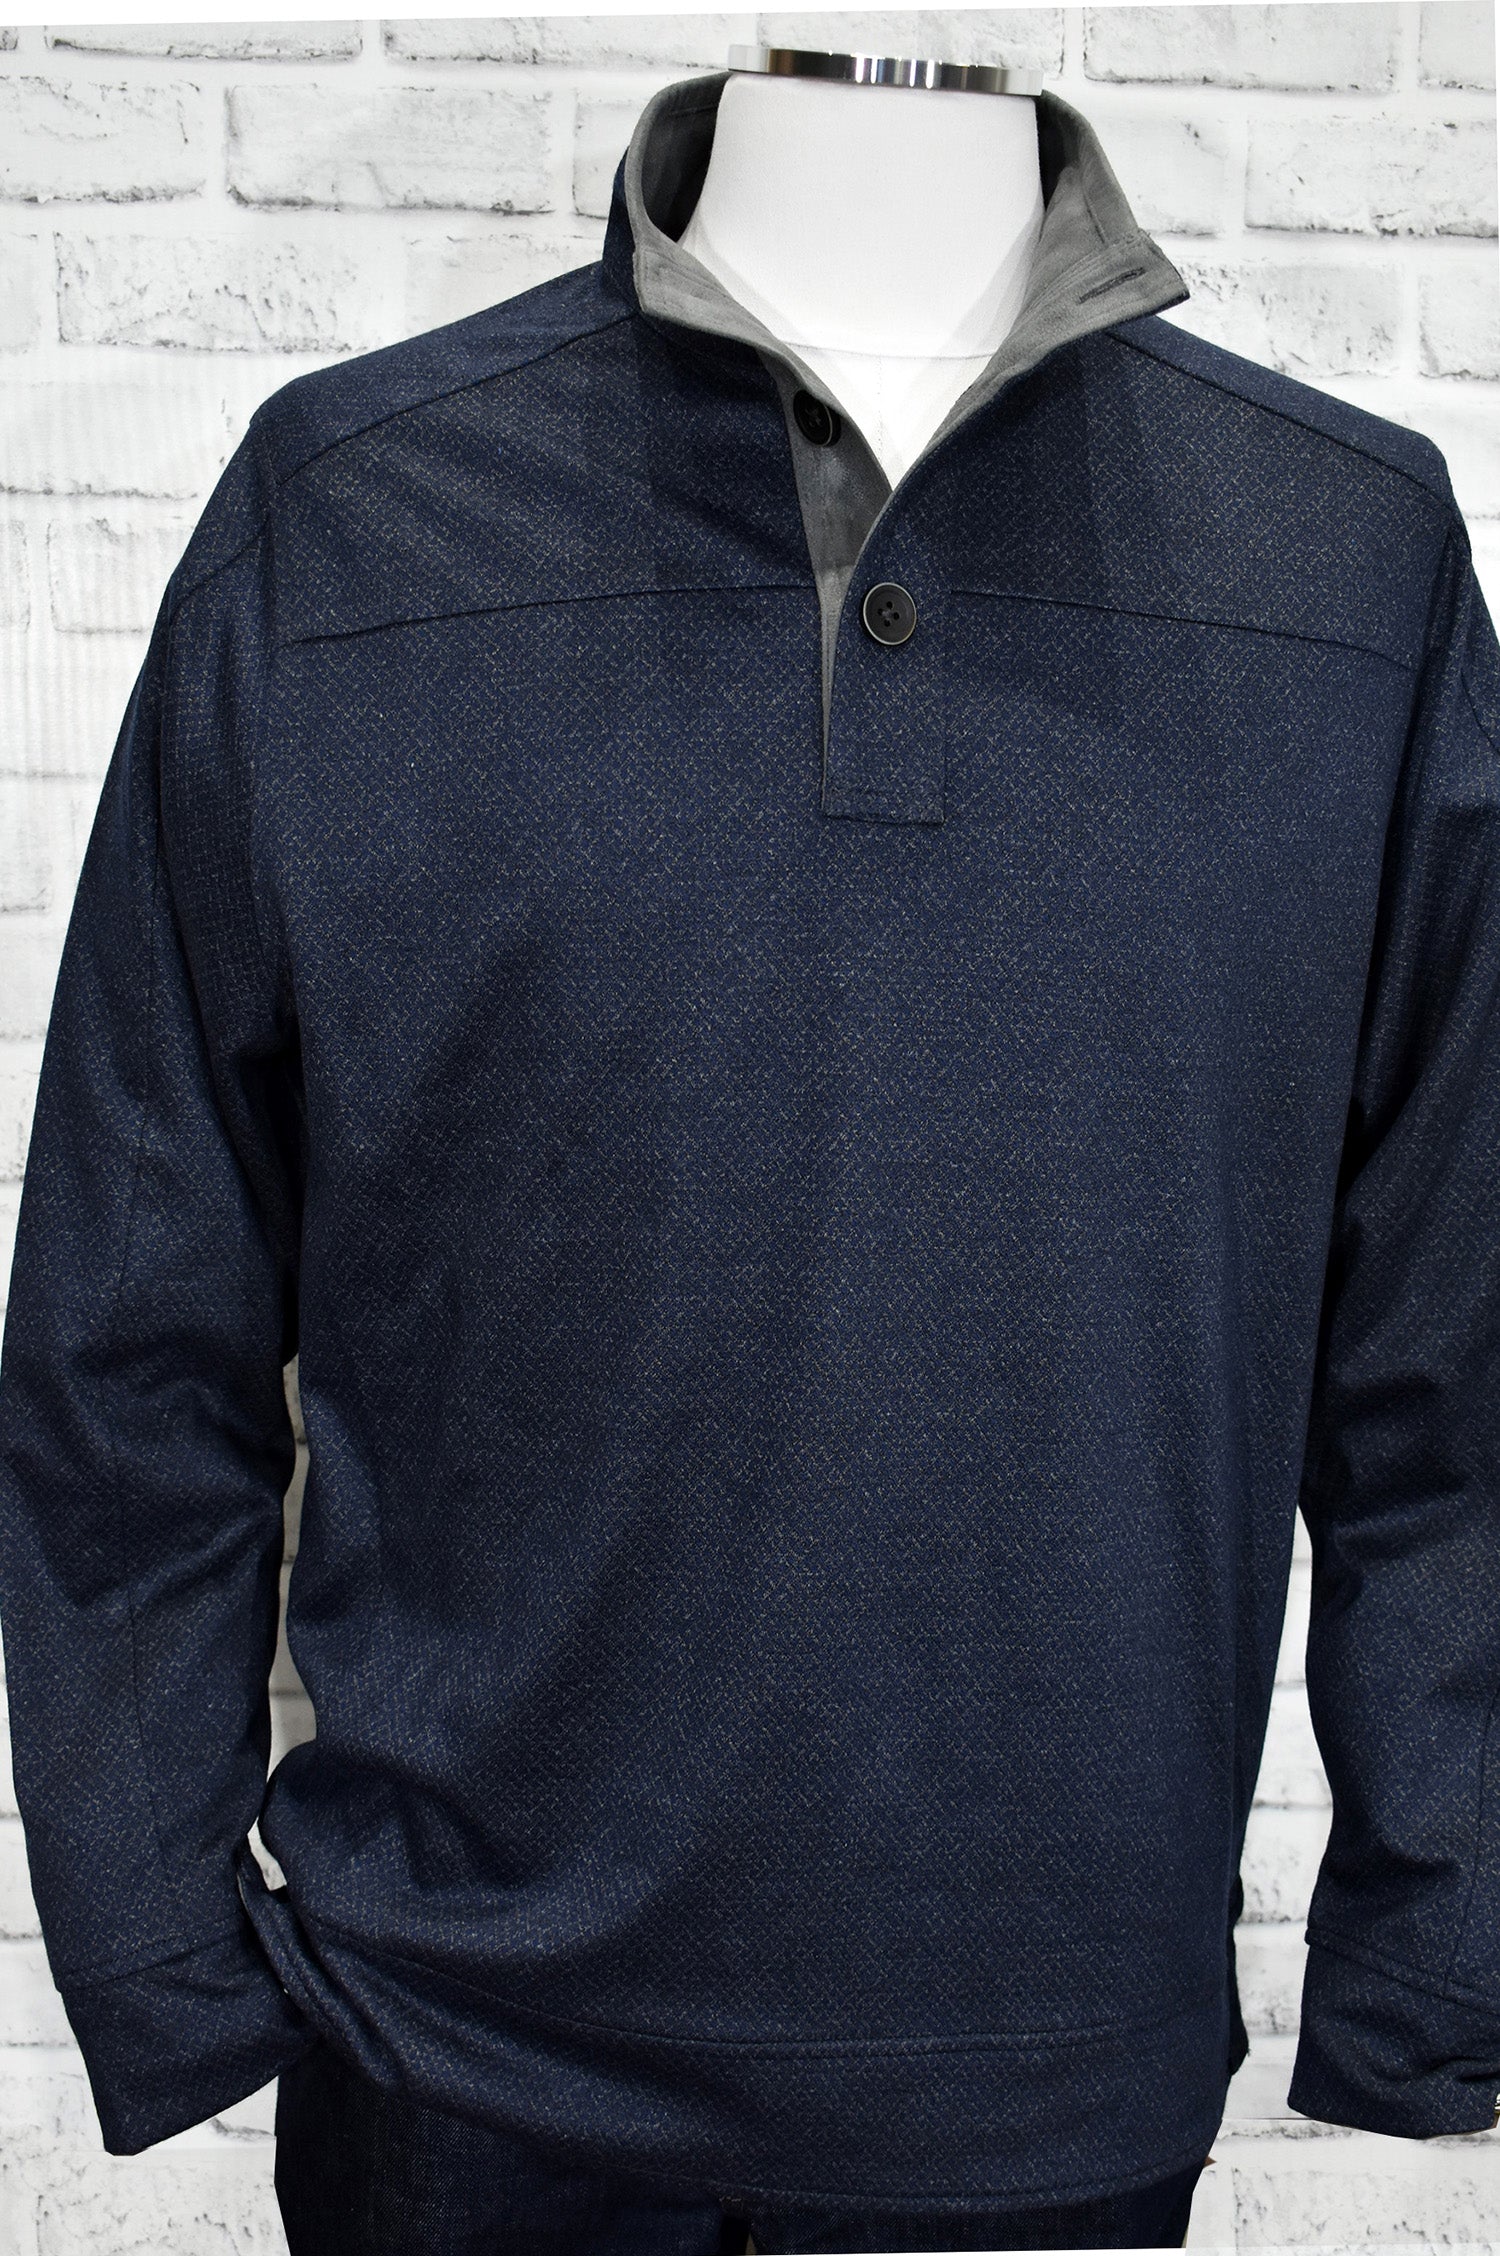 A classic mock neck in cotton microfiber fabric with a fine diamond pattern in soft gray over a navy ground.  The performance fabric is great for any event and traveling.  Add style to this basic mock with suede trim in the neck and along the button placket.    Open sleeves and open bottom for a cool contemporary style.  Light weight.  Classic fit.